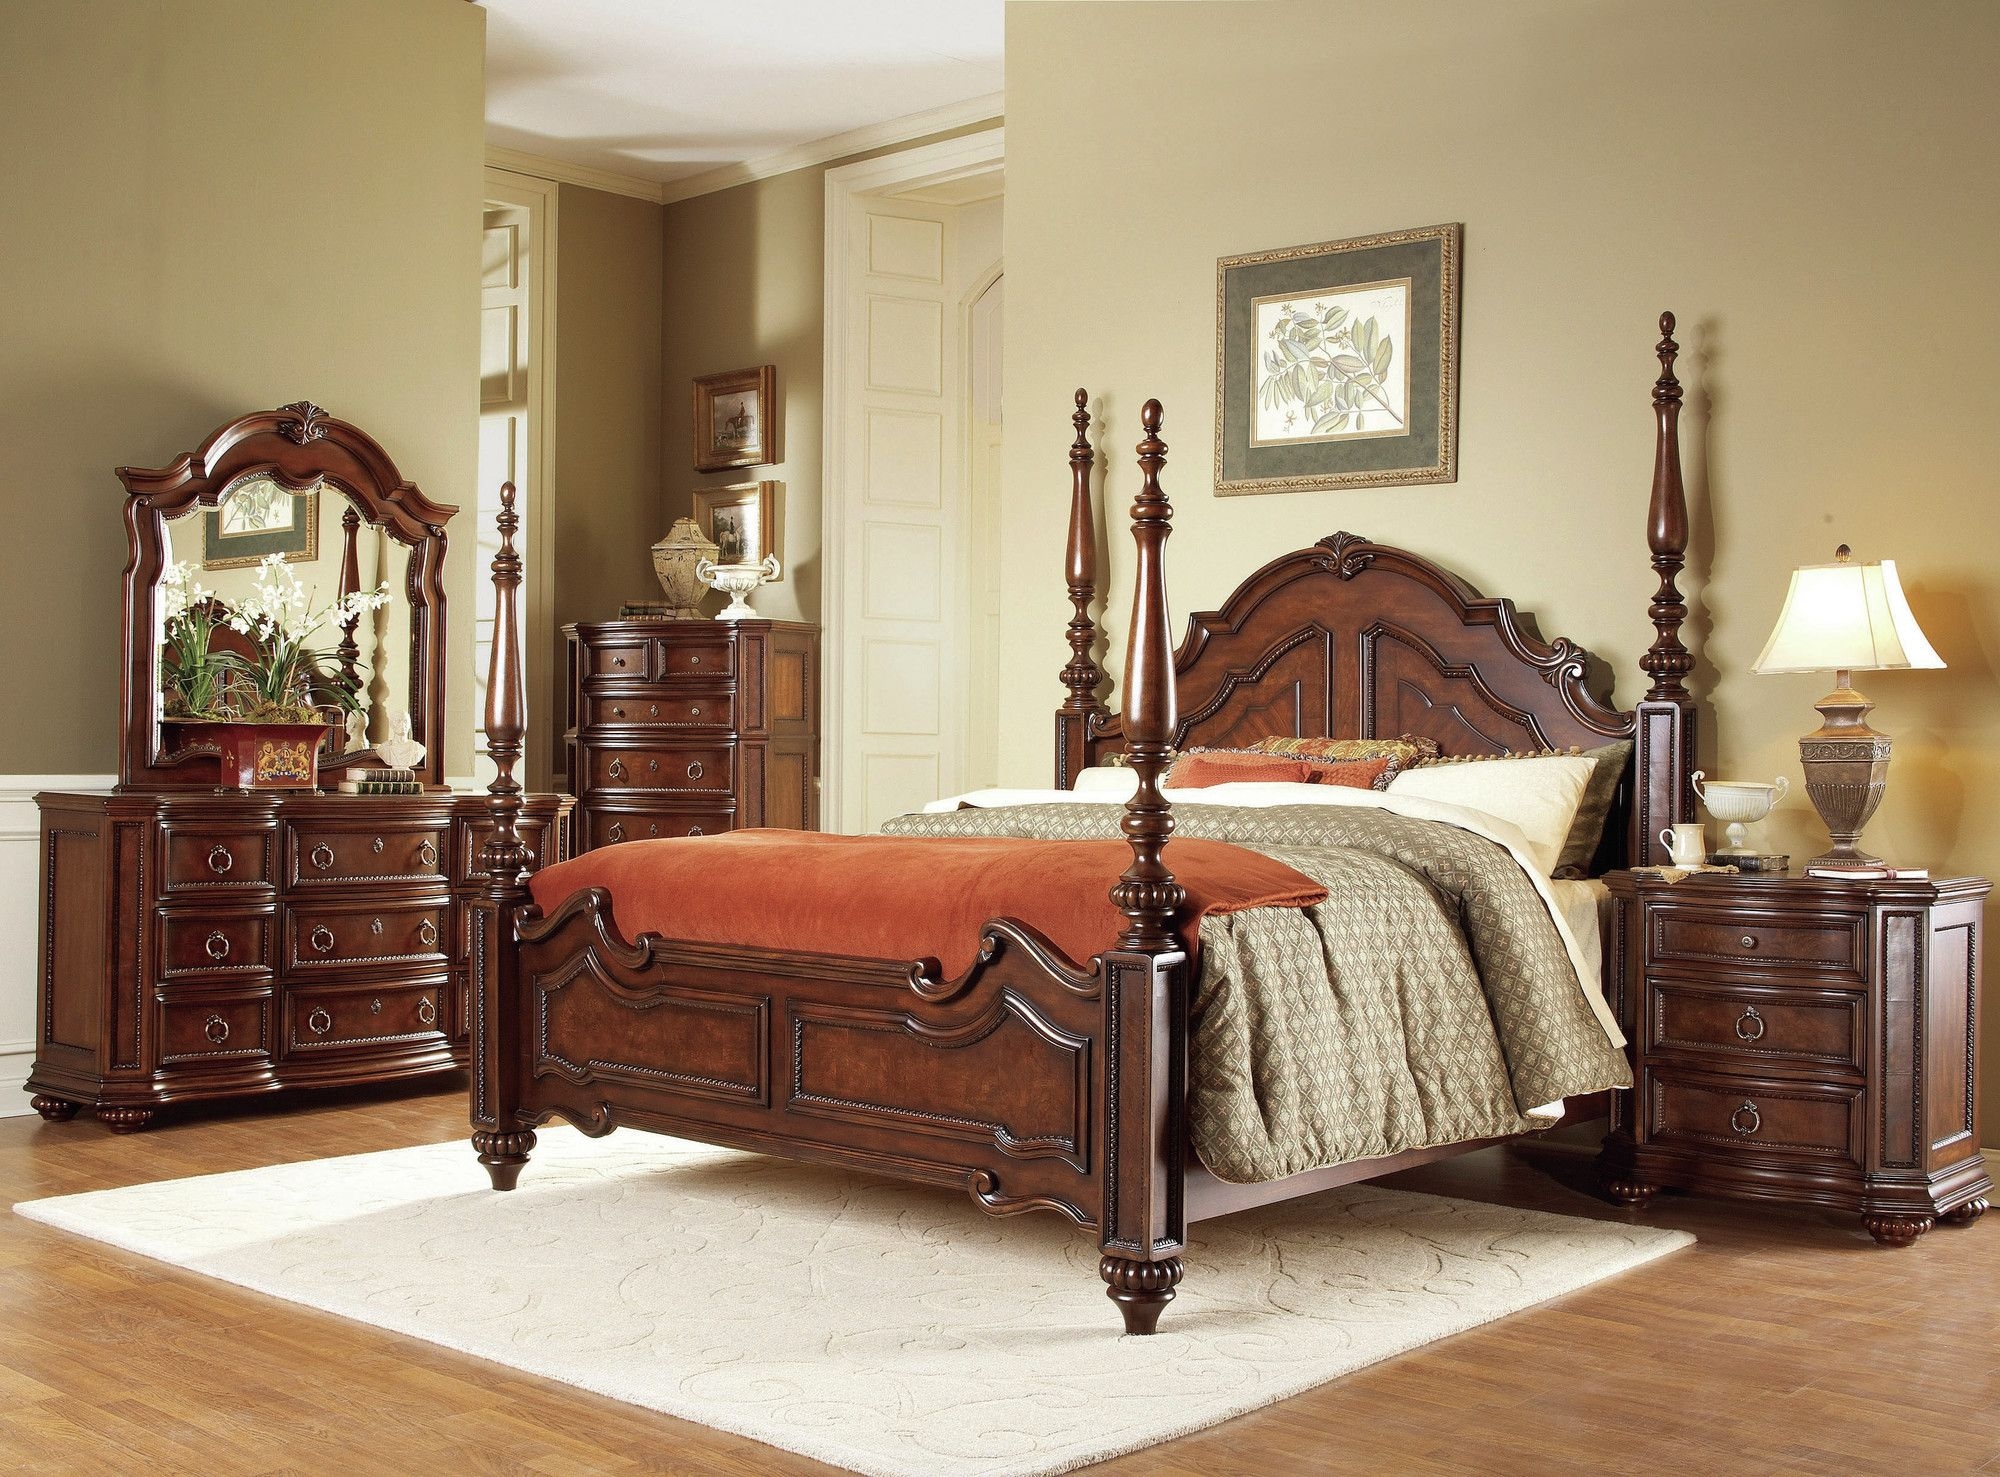 1390 Series Four Poster Bed